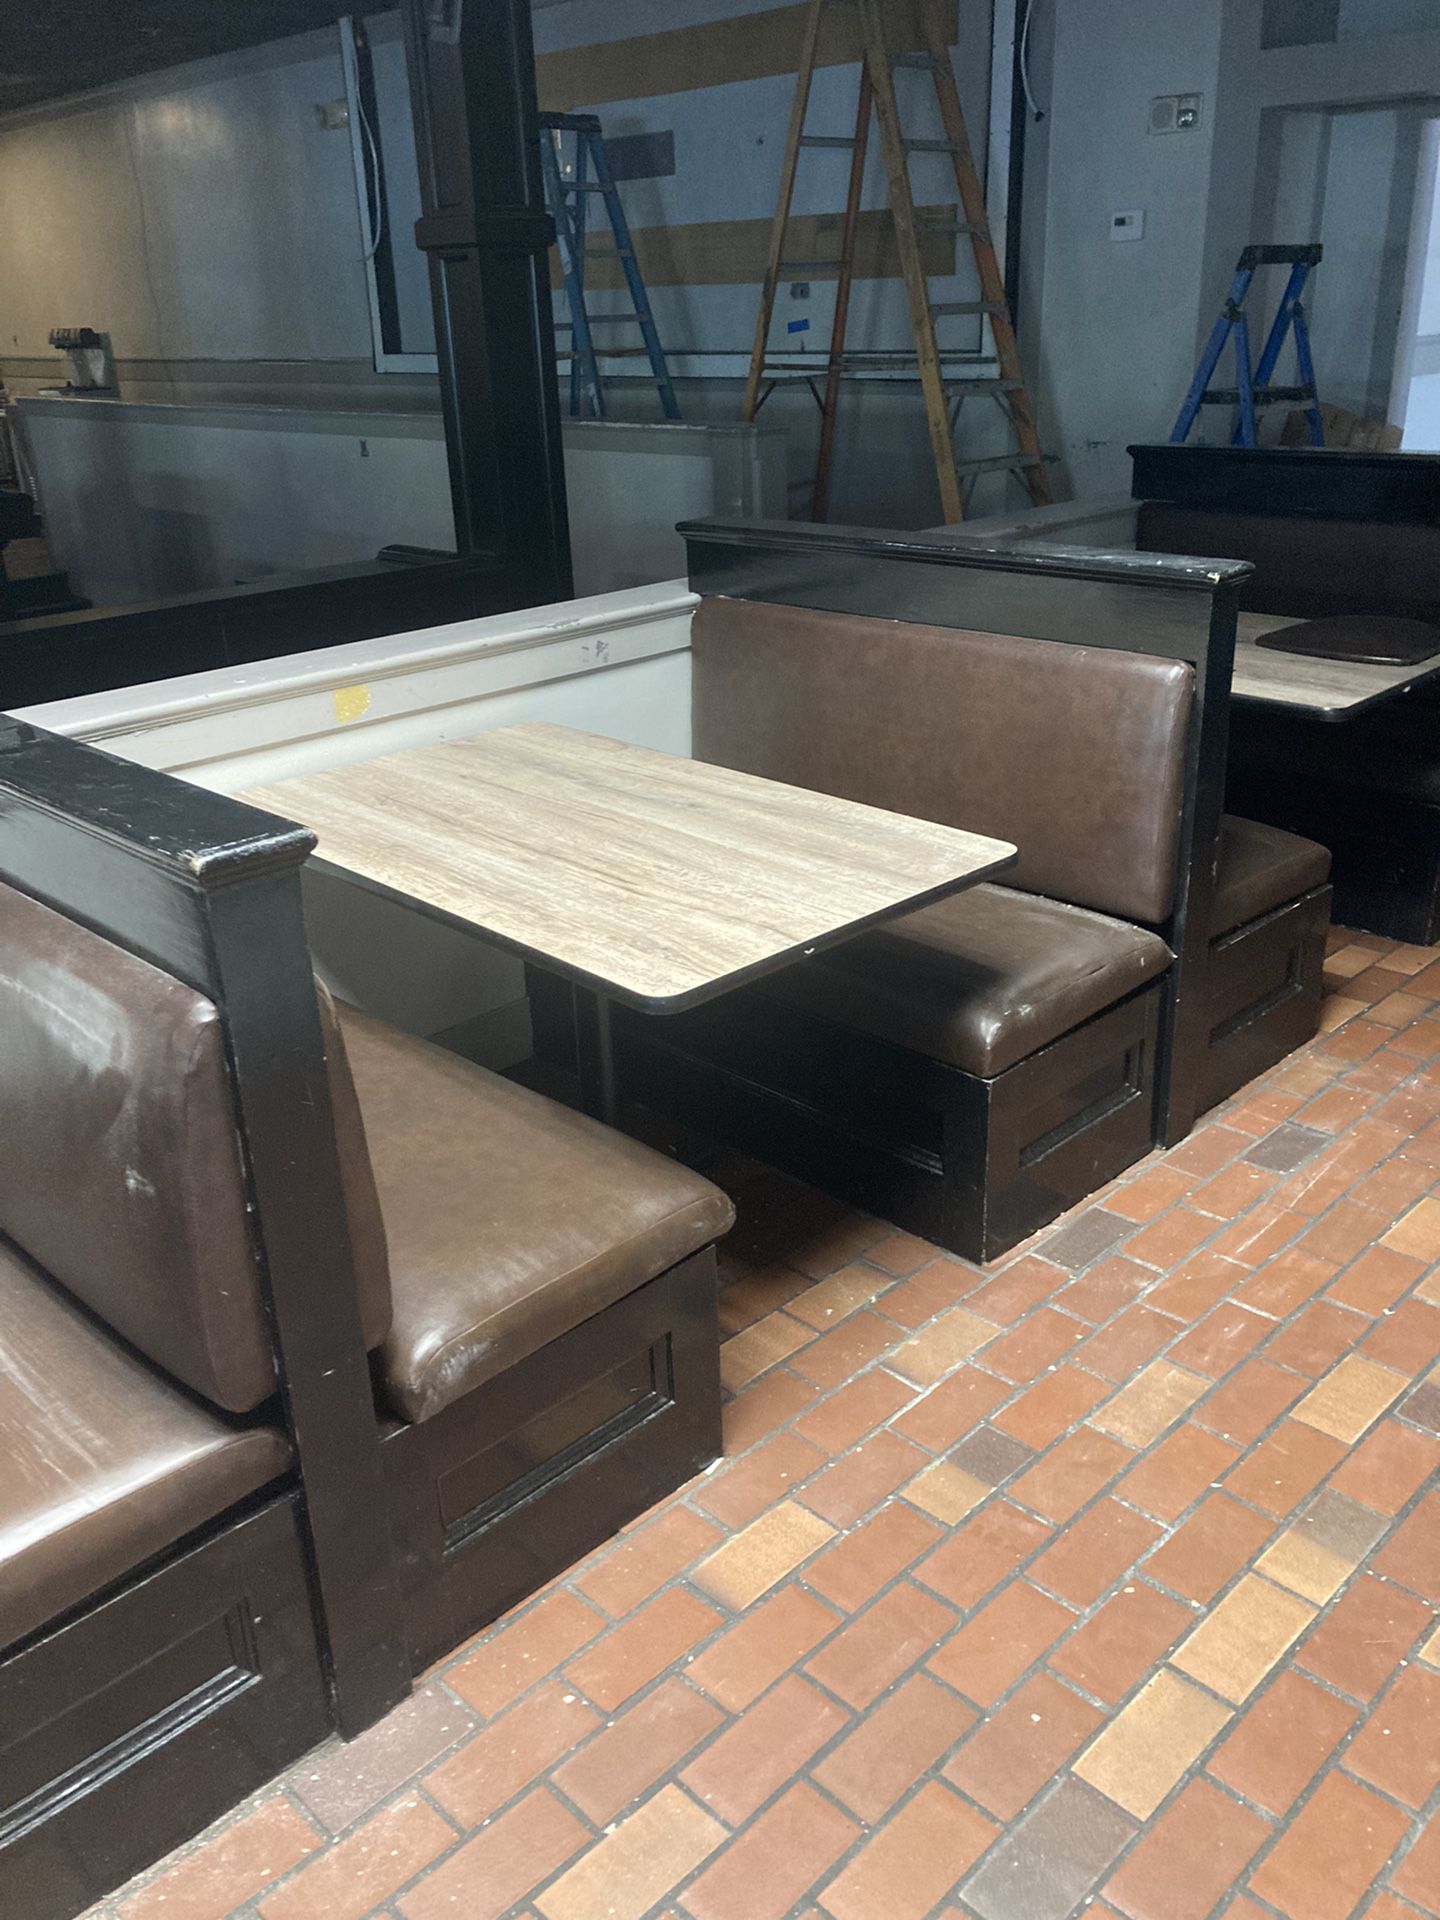 Restaurant & Dining Booths for Sale in Houston, TX